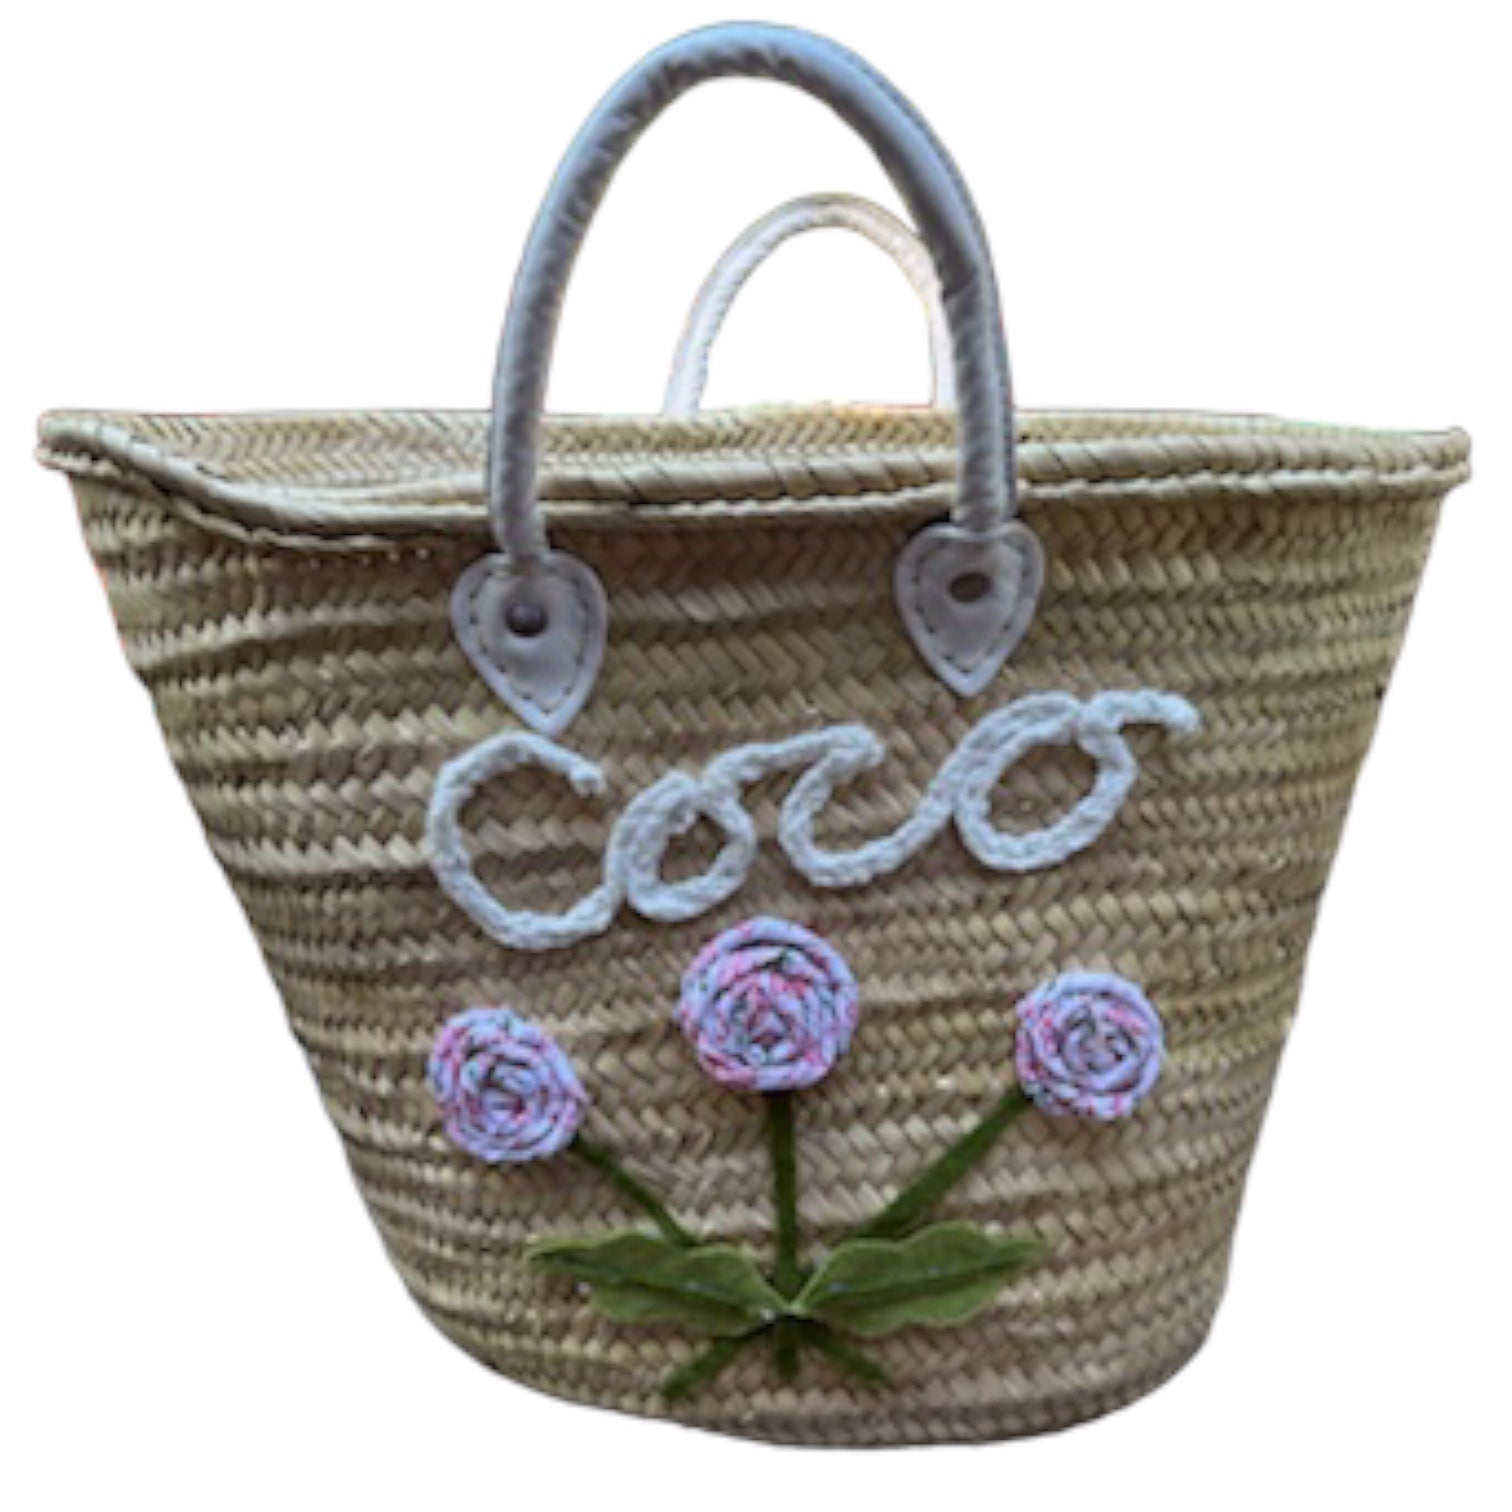 Big Embroidered Bag / Basket / French Market Basket / Straw Basket - white - Premium  from Tricia Lowenfield Design 